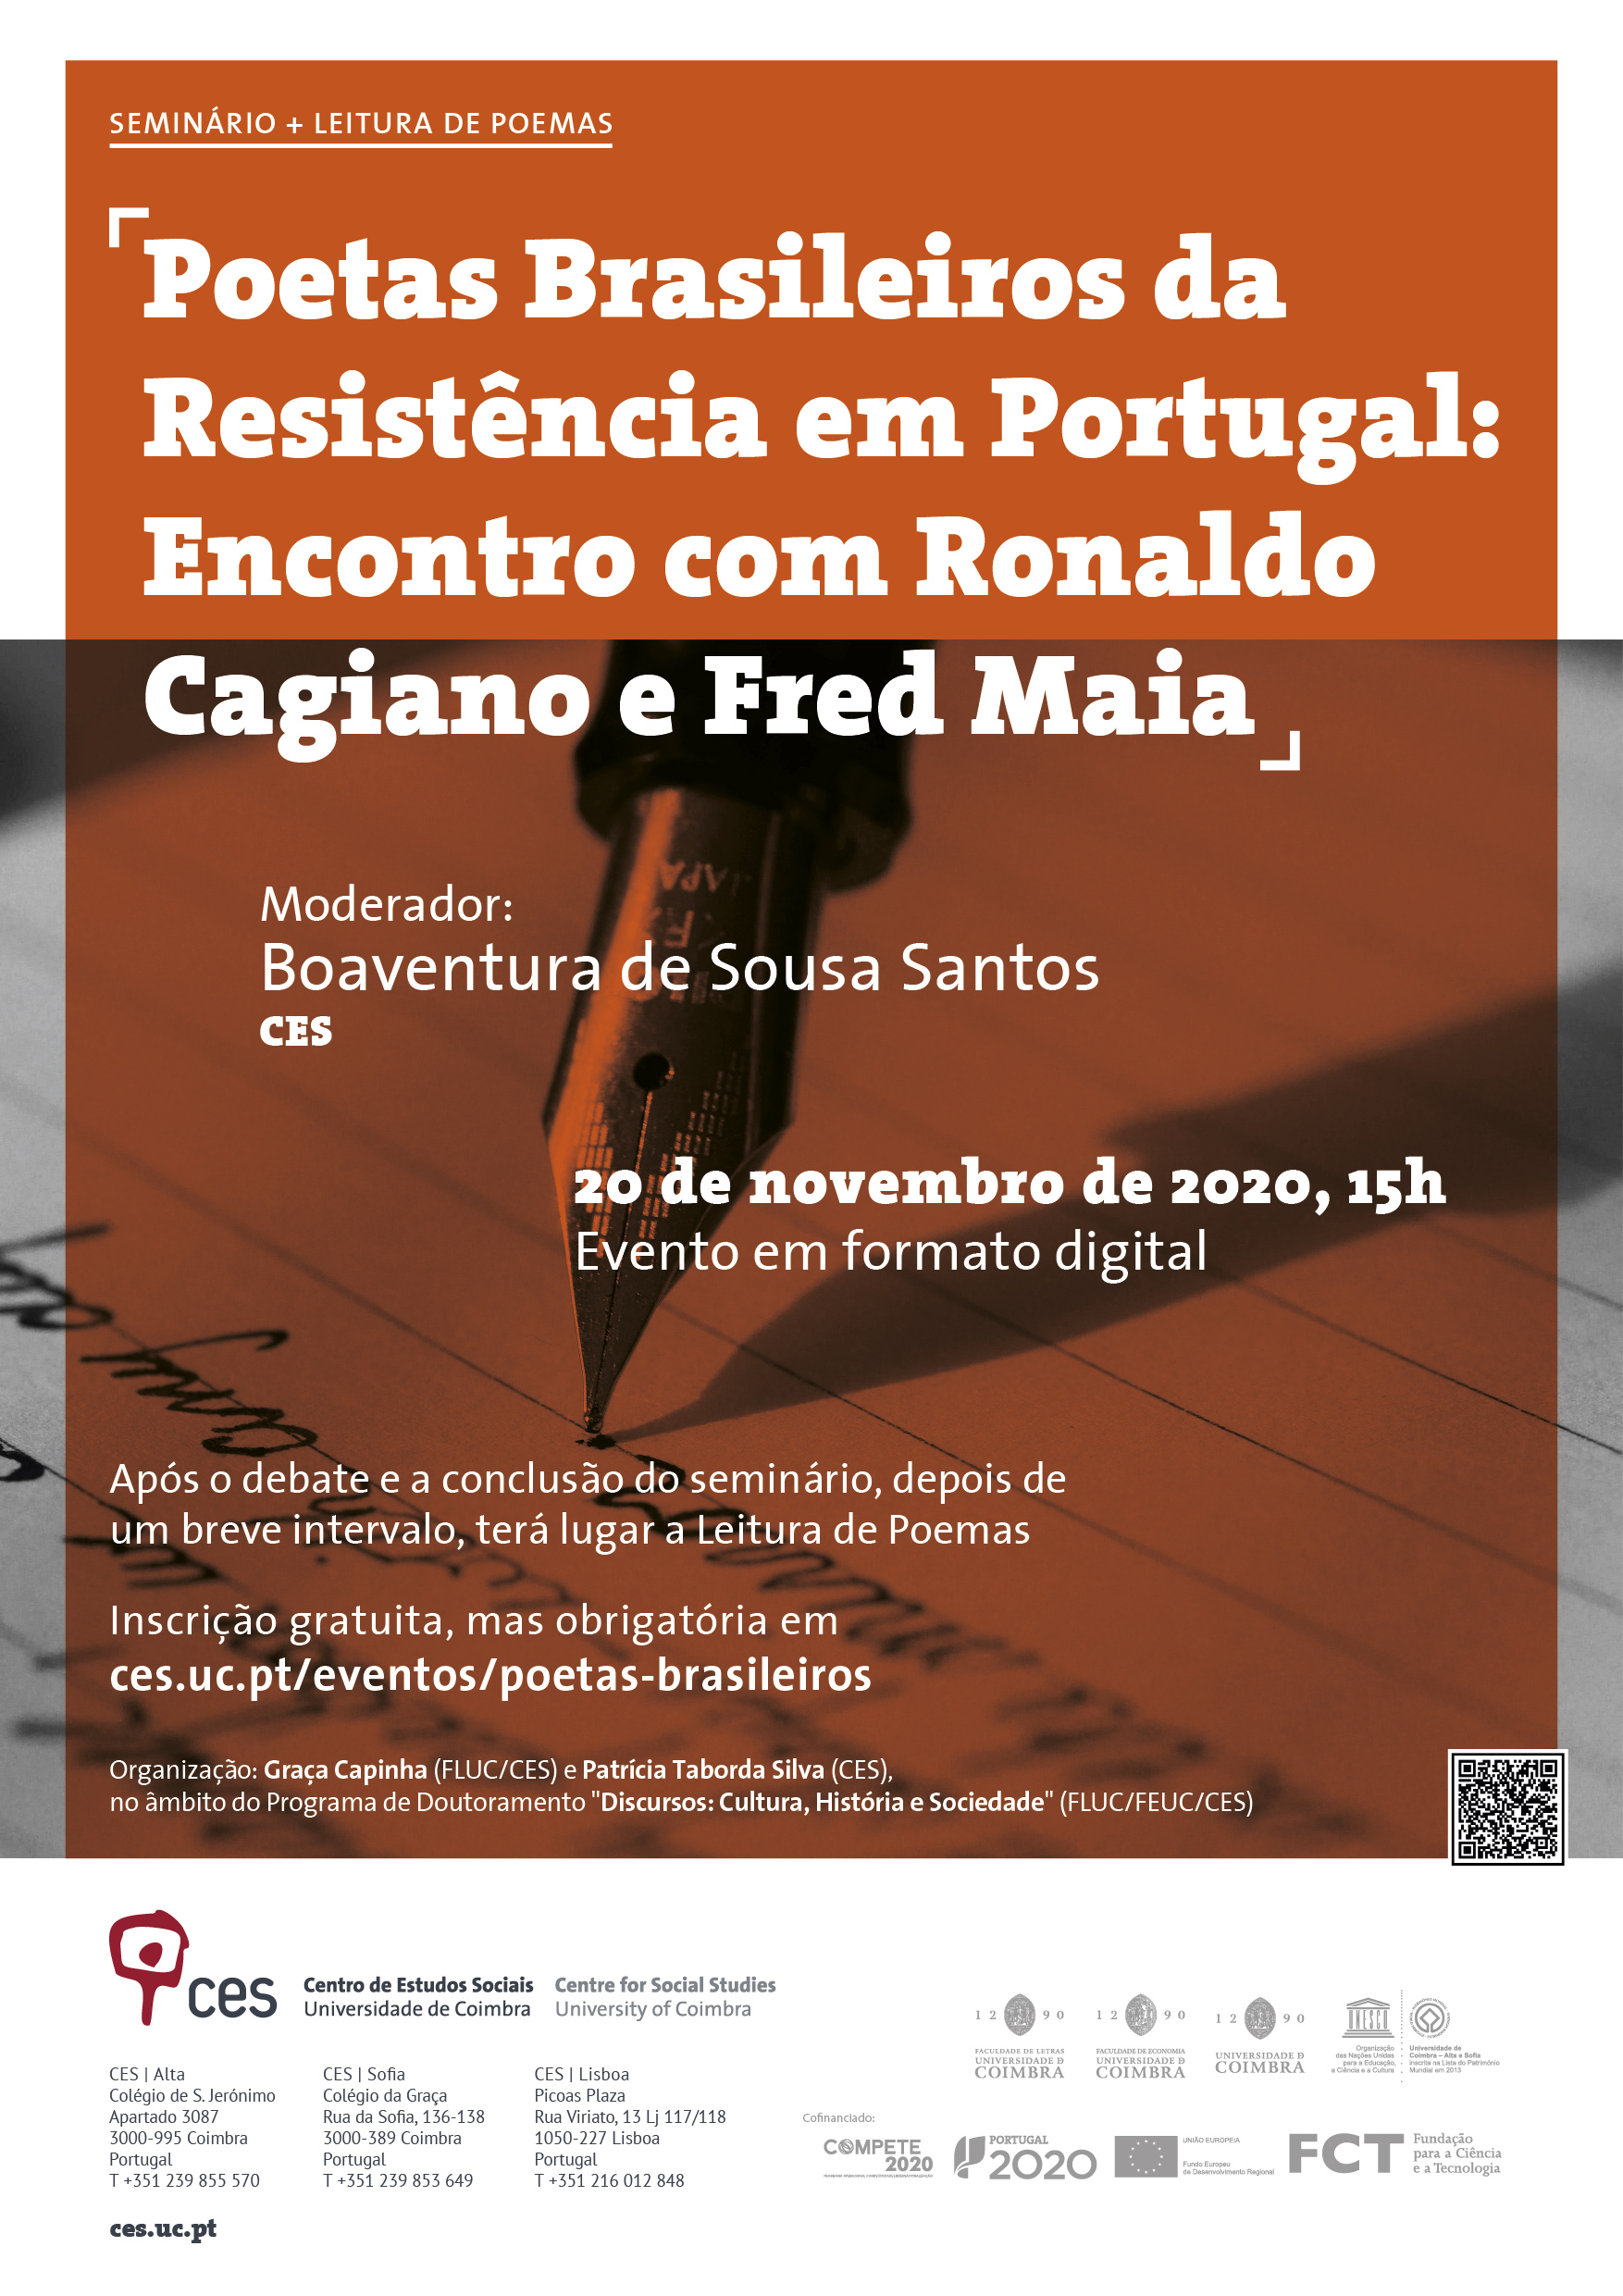 Brazilian Poets of Resistance in Portugal: Meeting with Ronaldo Cagiano and Fred Maia<span id="edit_31117"><script>$(function() { $('#edit_31117').load( "/myces/user/editobj.php?tipo=evento&id=31117" ); });</script></span>